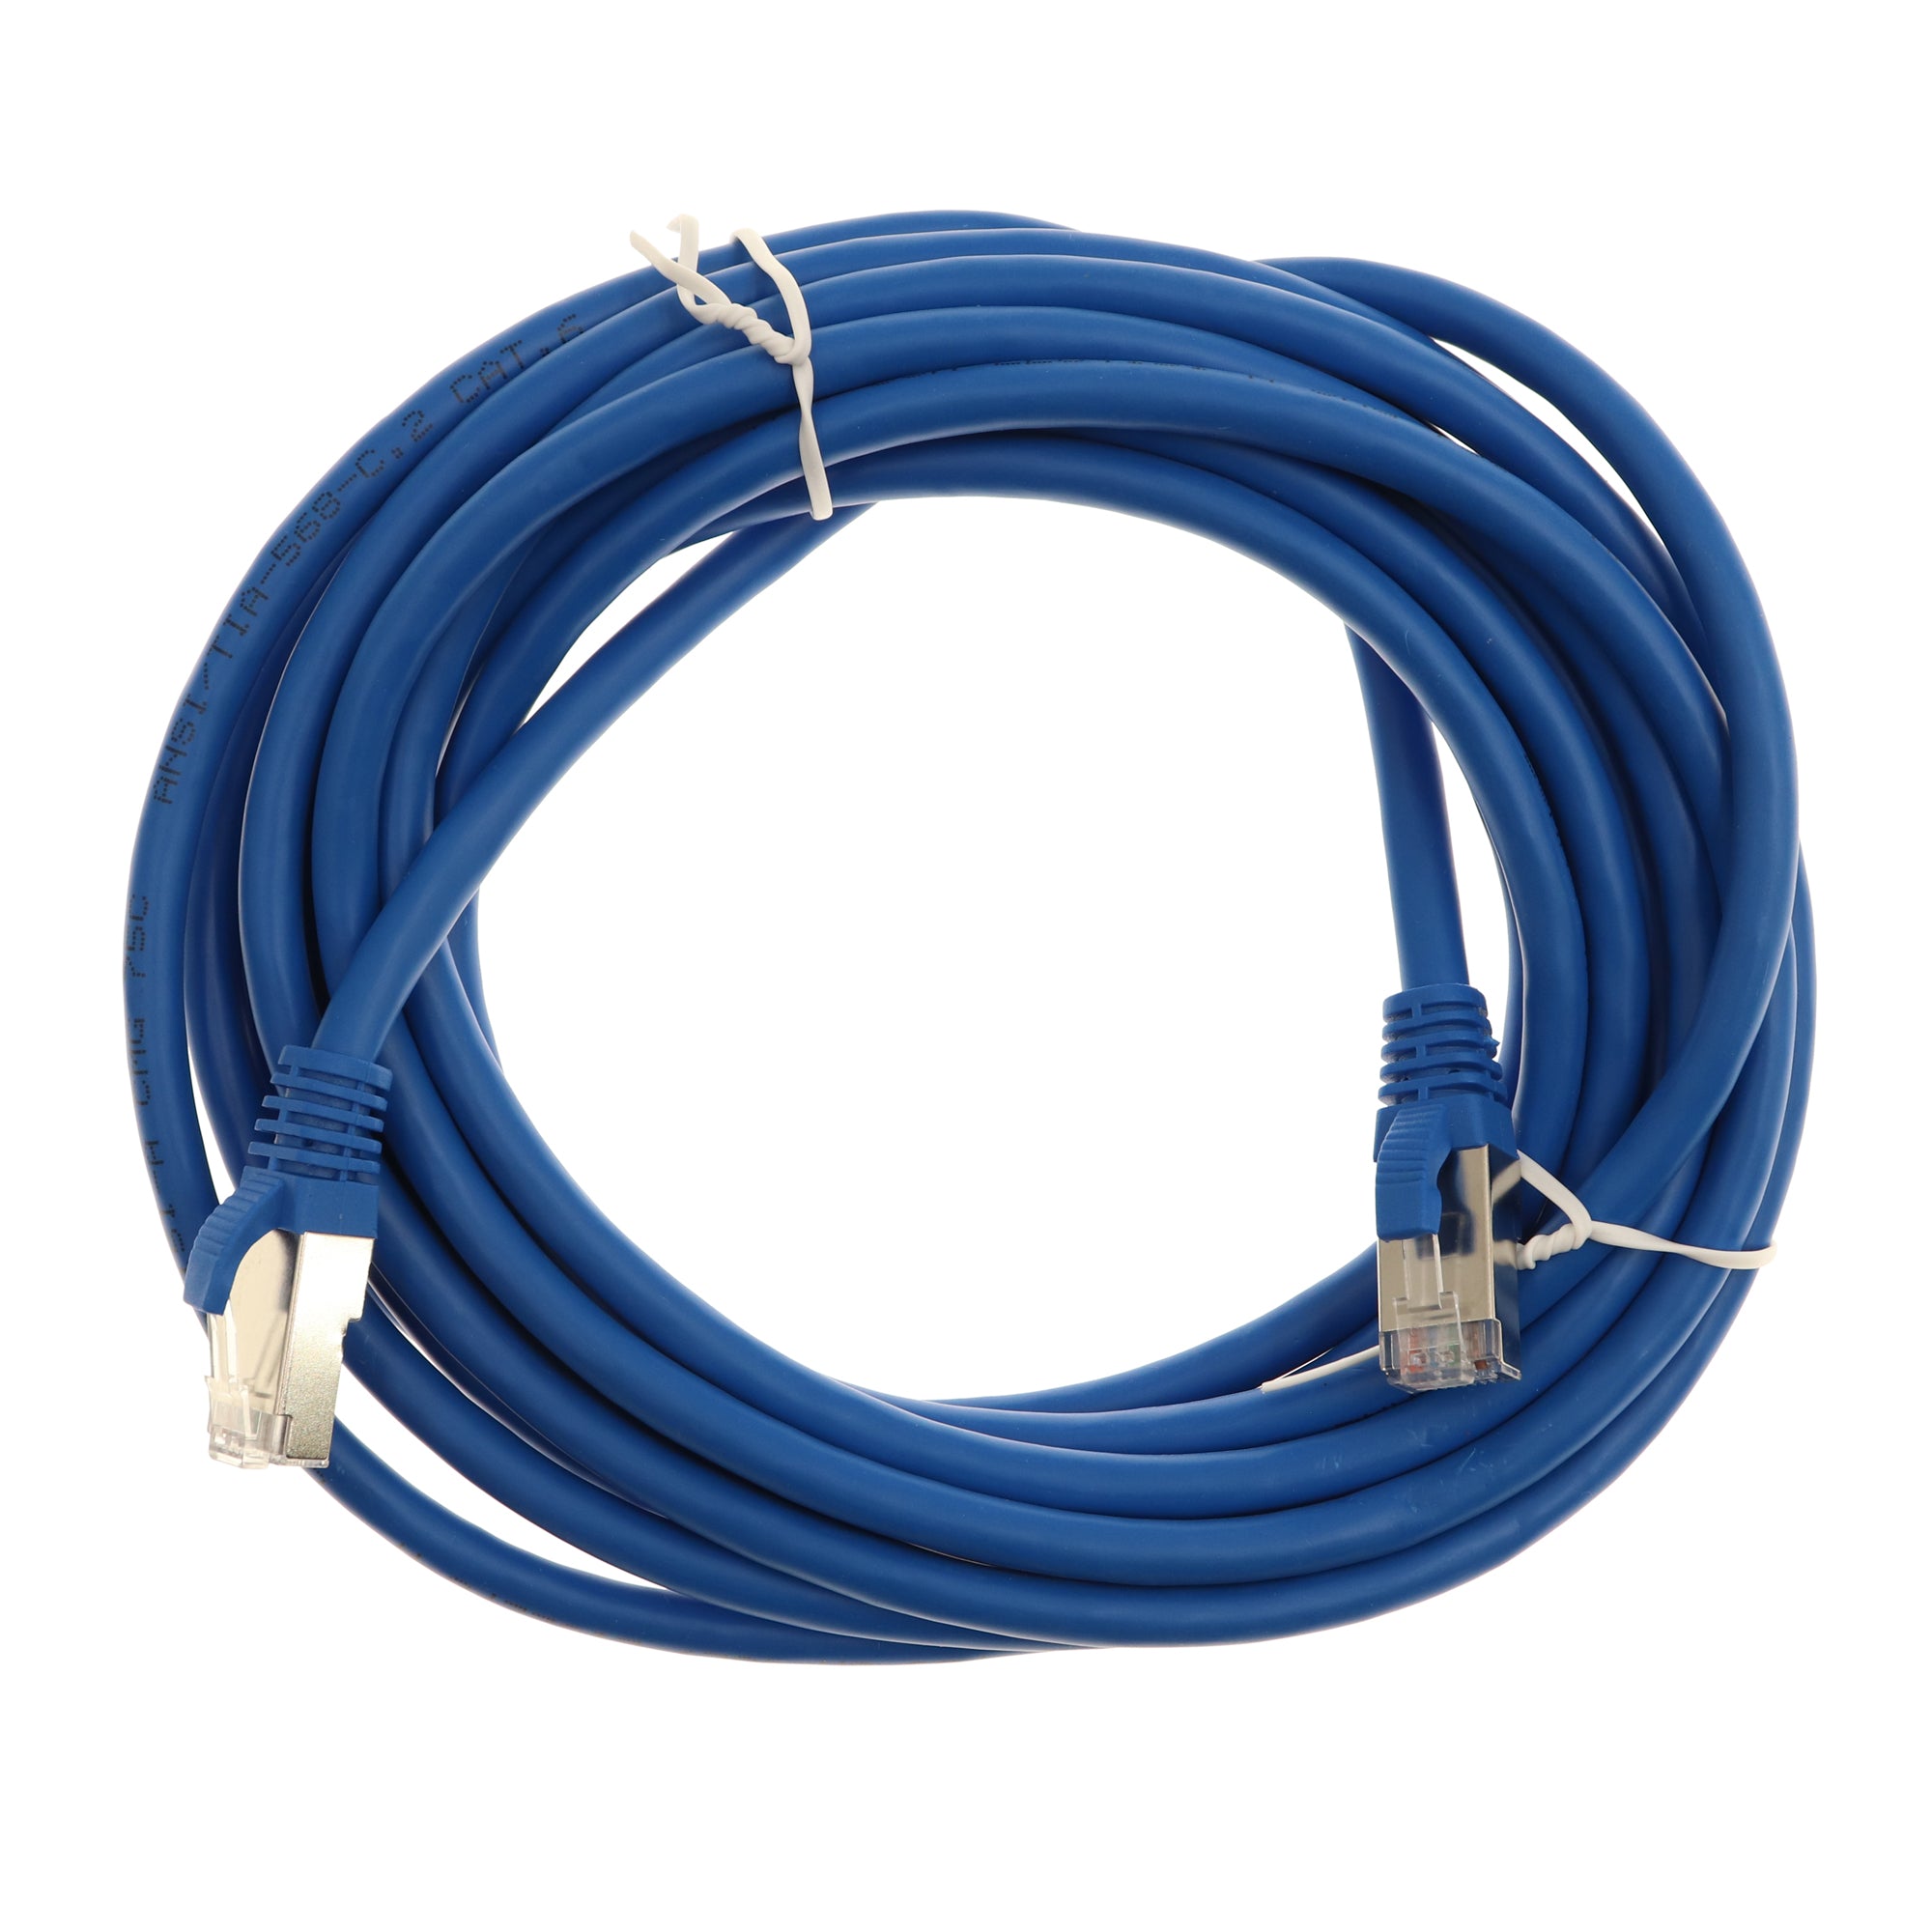 C2G, C2G 00803 CAT6 SNAGLESS SHIELDED ETHERNET NETWORK PATCH CABLE, BLUE (15 FEET)